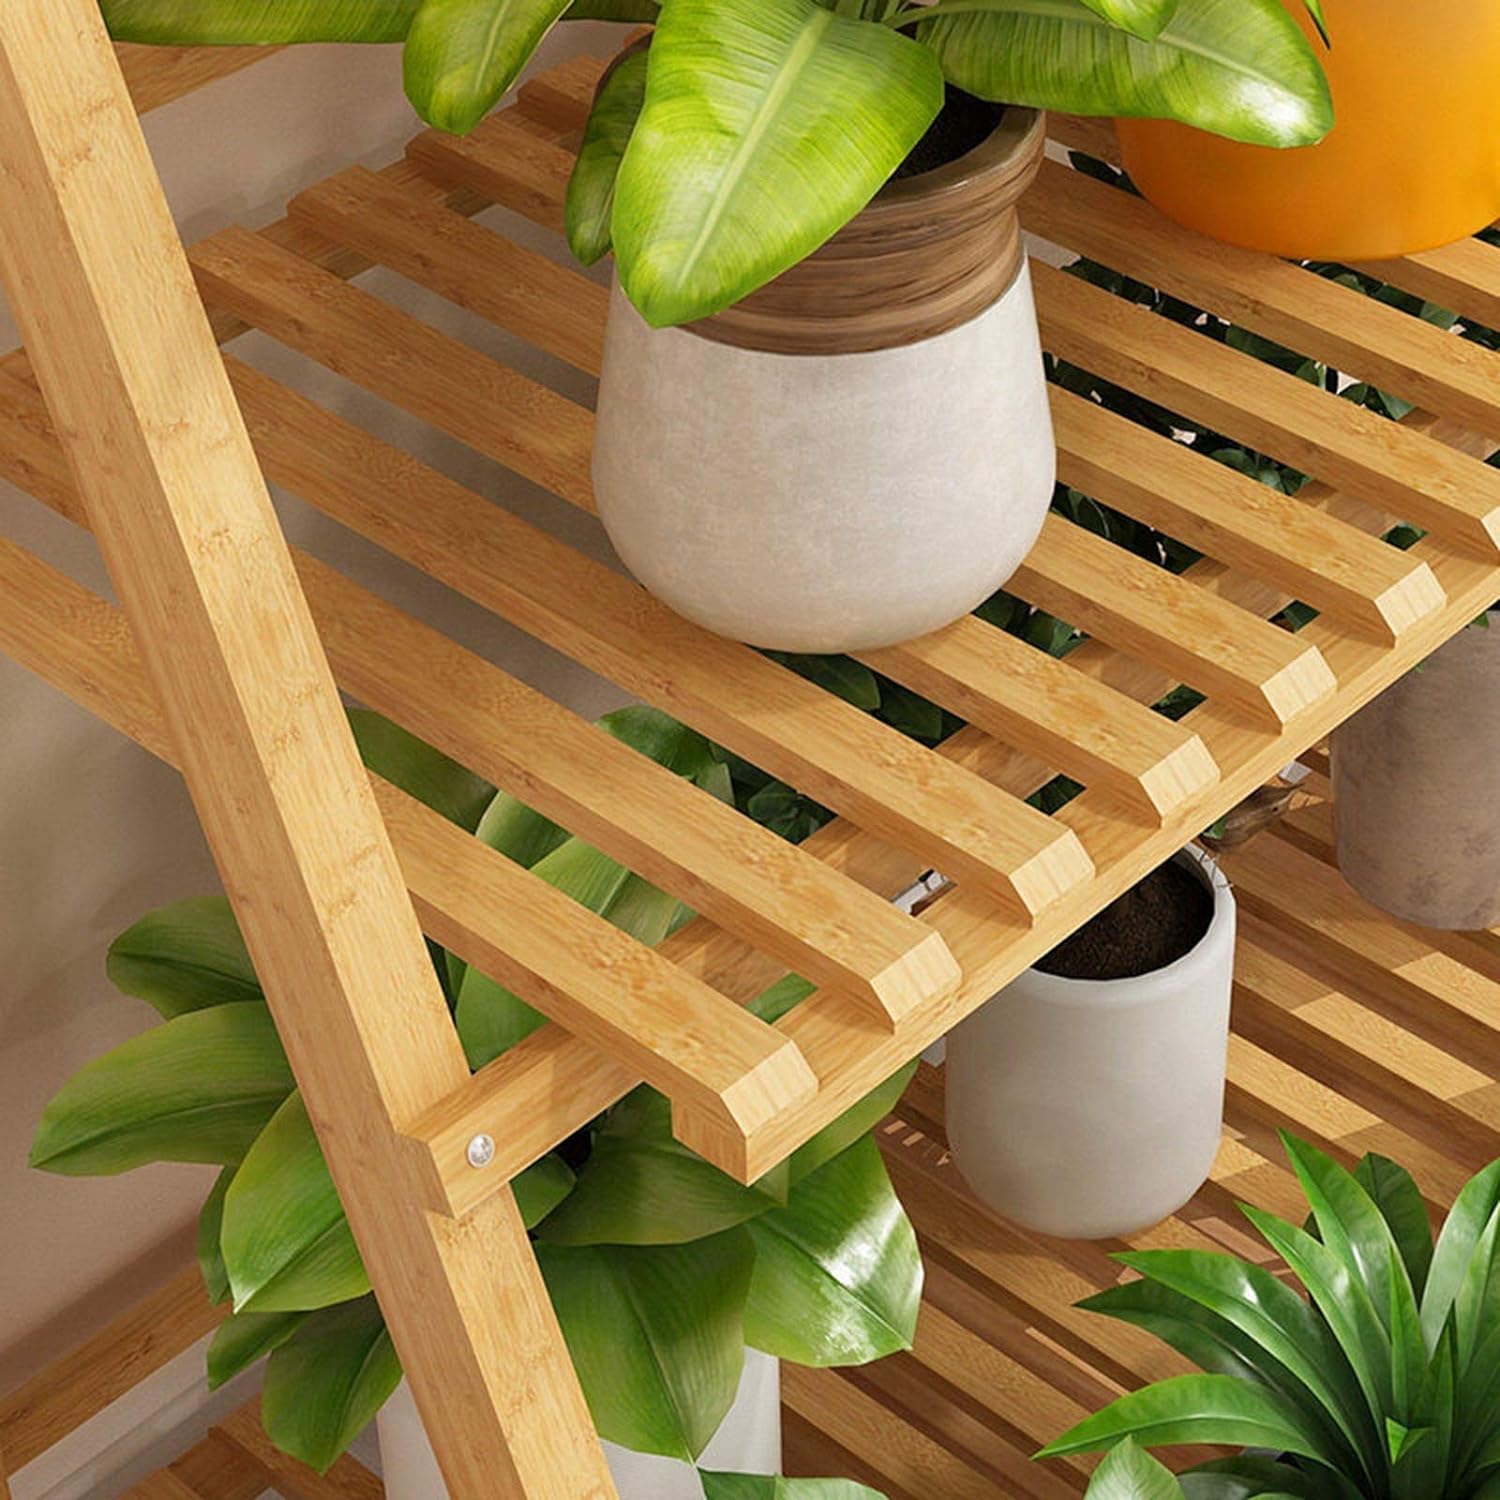 A close-up view captures the intricate details of the 4-Layer Foldable Indoor Wooden Plant Stand